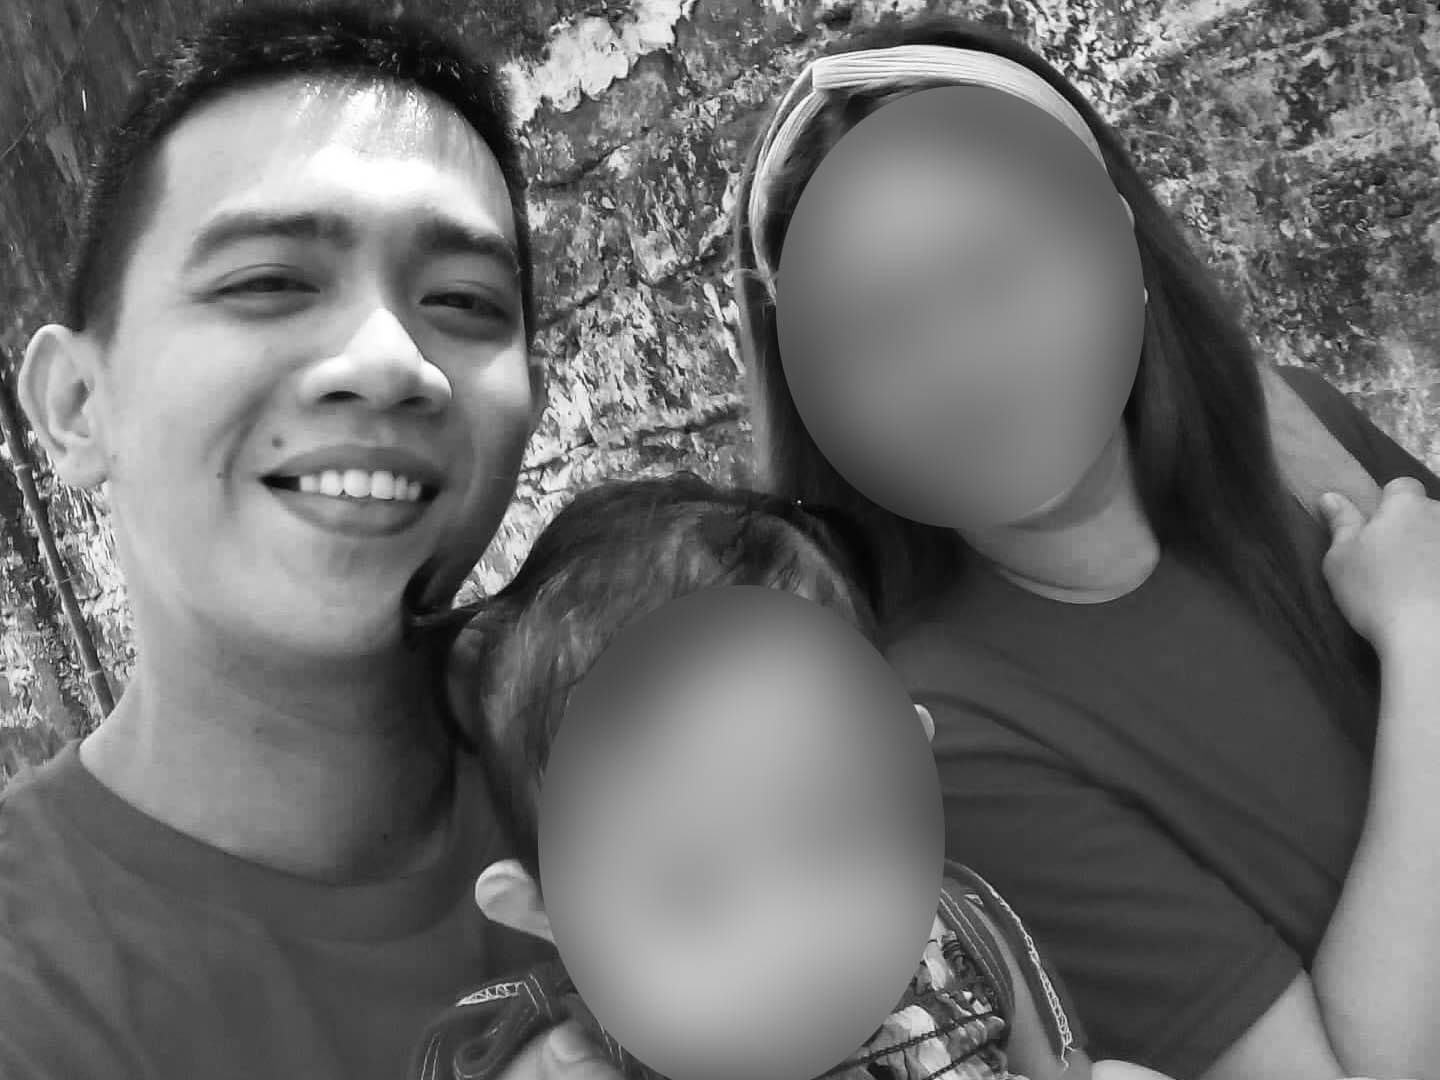 Bulacan drug war: Cops say he fought back, his wife says it was an execution